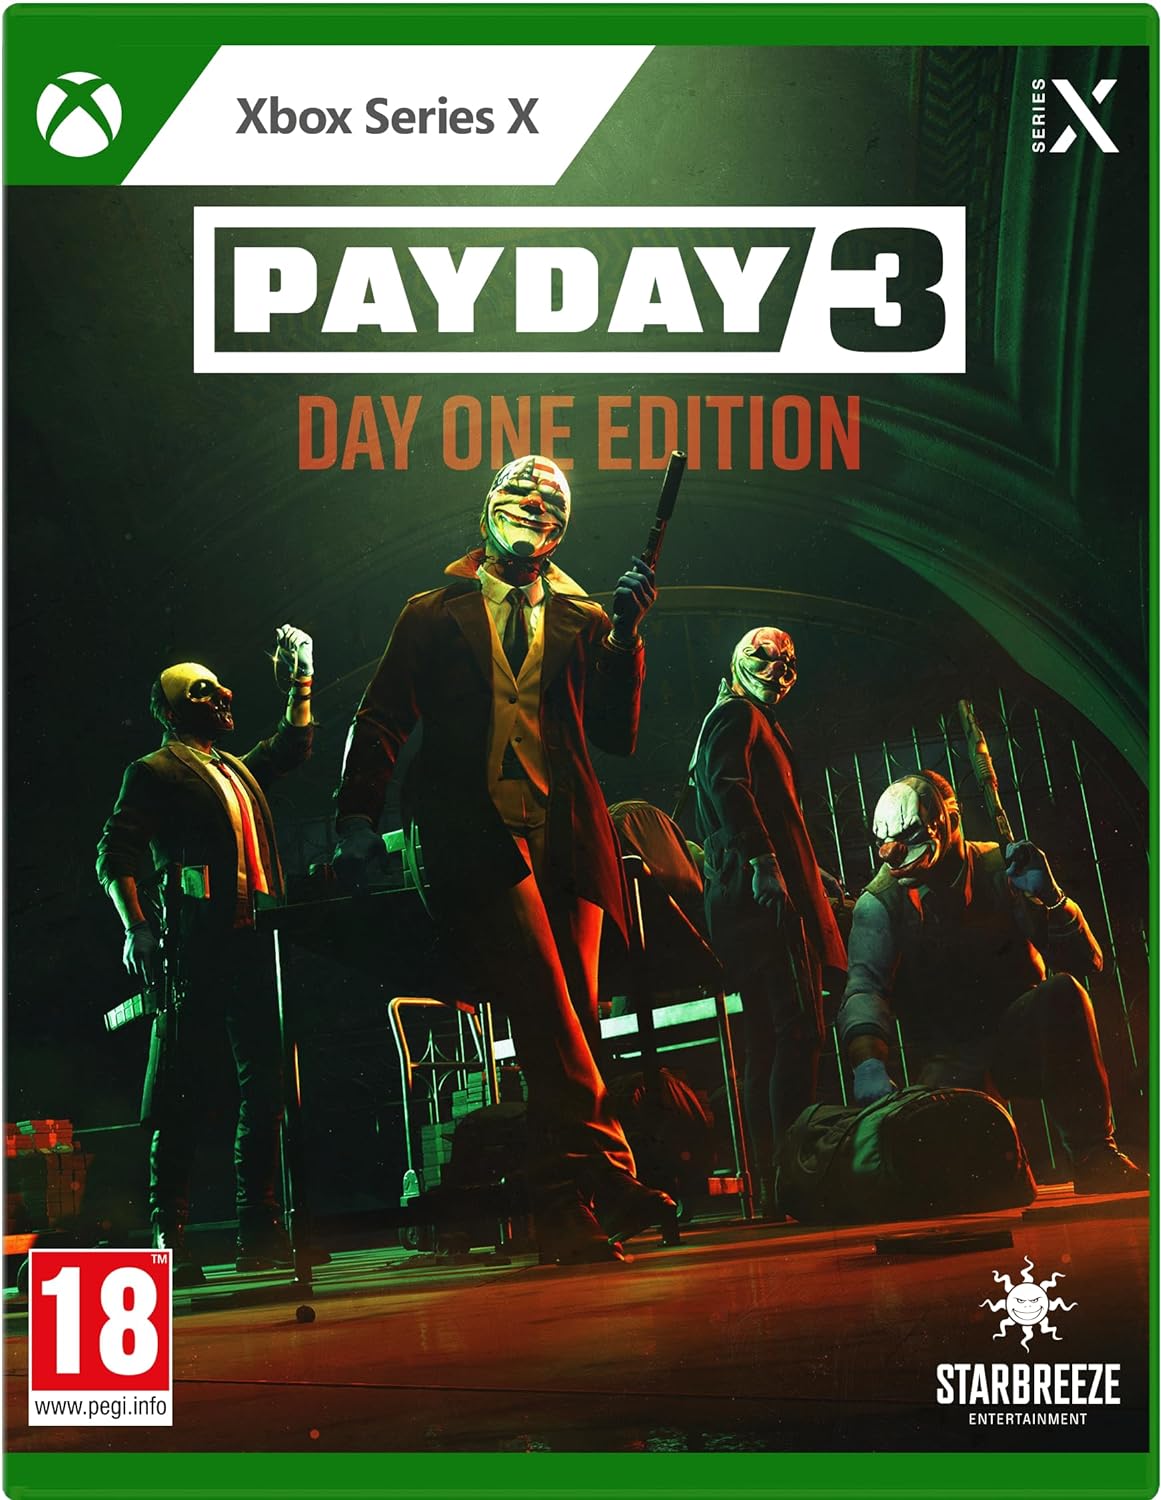 Payday 3 - Day One Edition - Xbox Series X [New] | Yard's Games Ltd